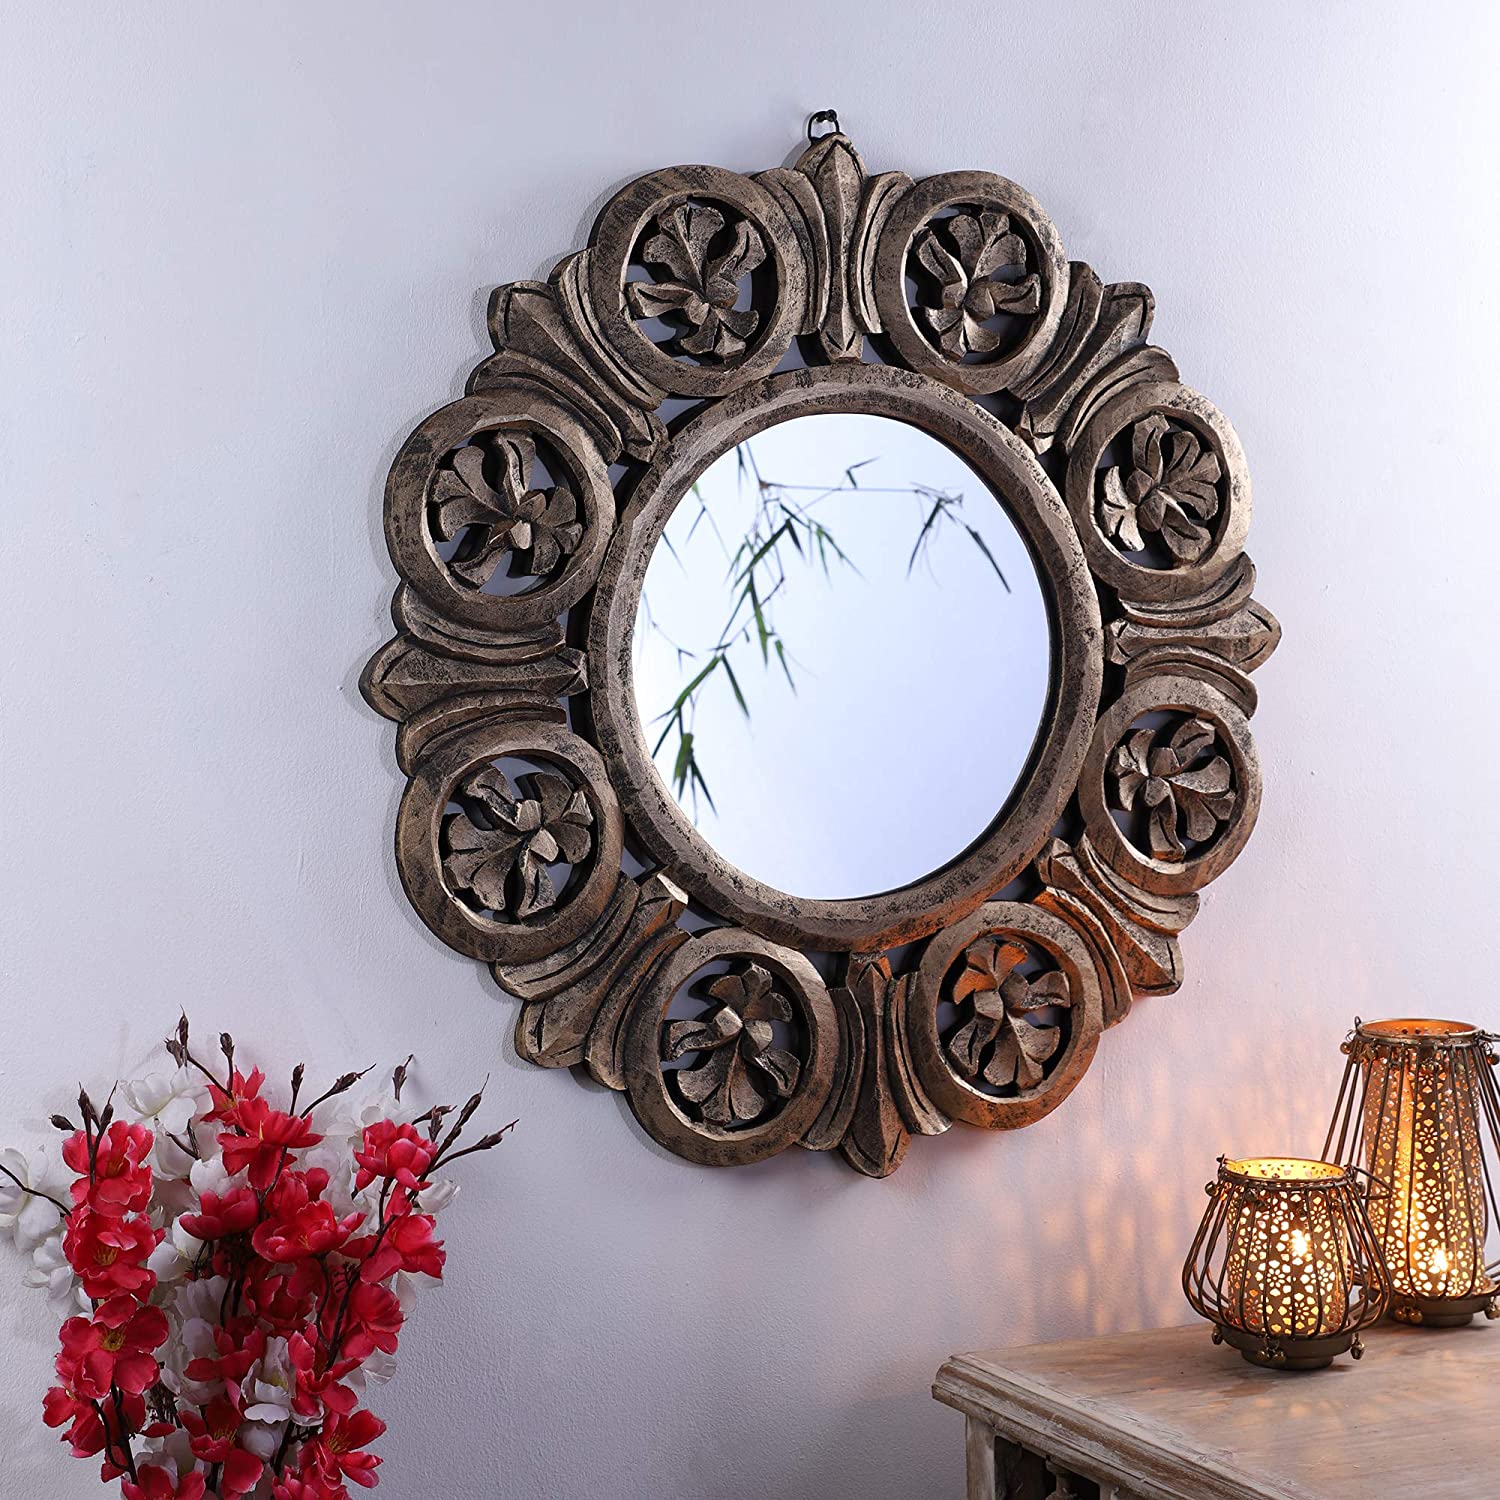 Decorative Hand Crafted Engineered Wooden Round Wall Mount Mirror Frame in Antique Gold Finish (Model: TUS-MR-50, Gold, Medium, 24 x24)